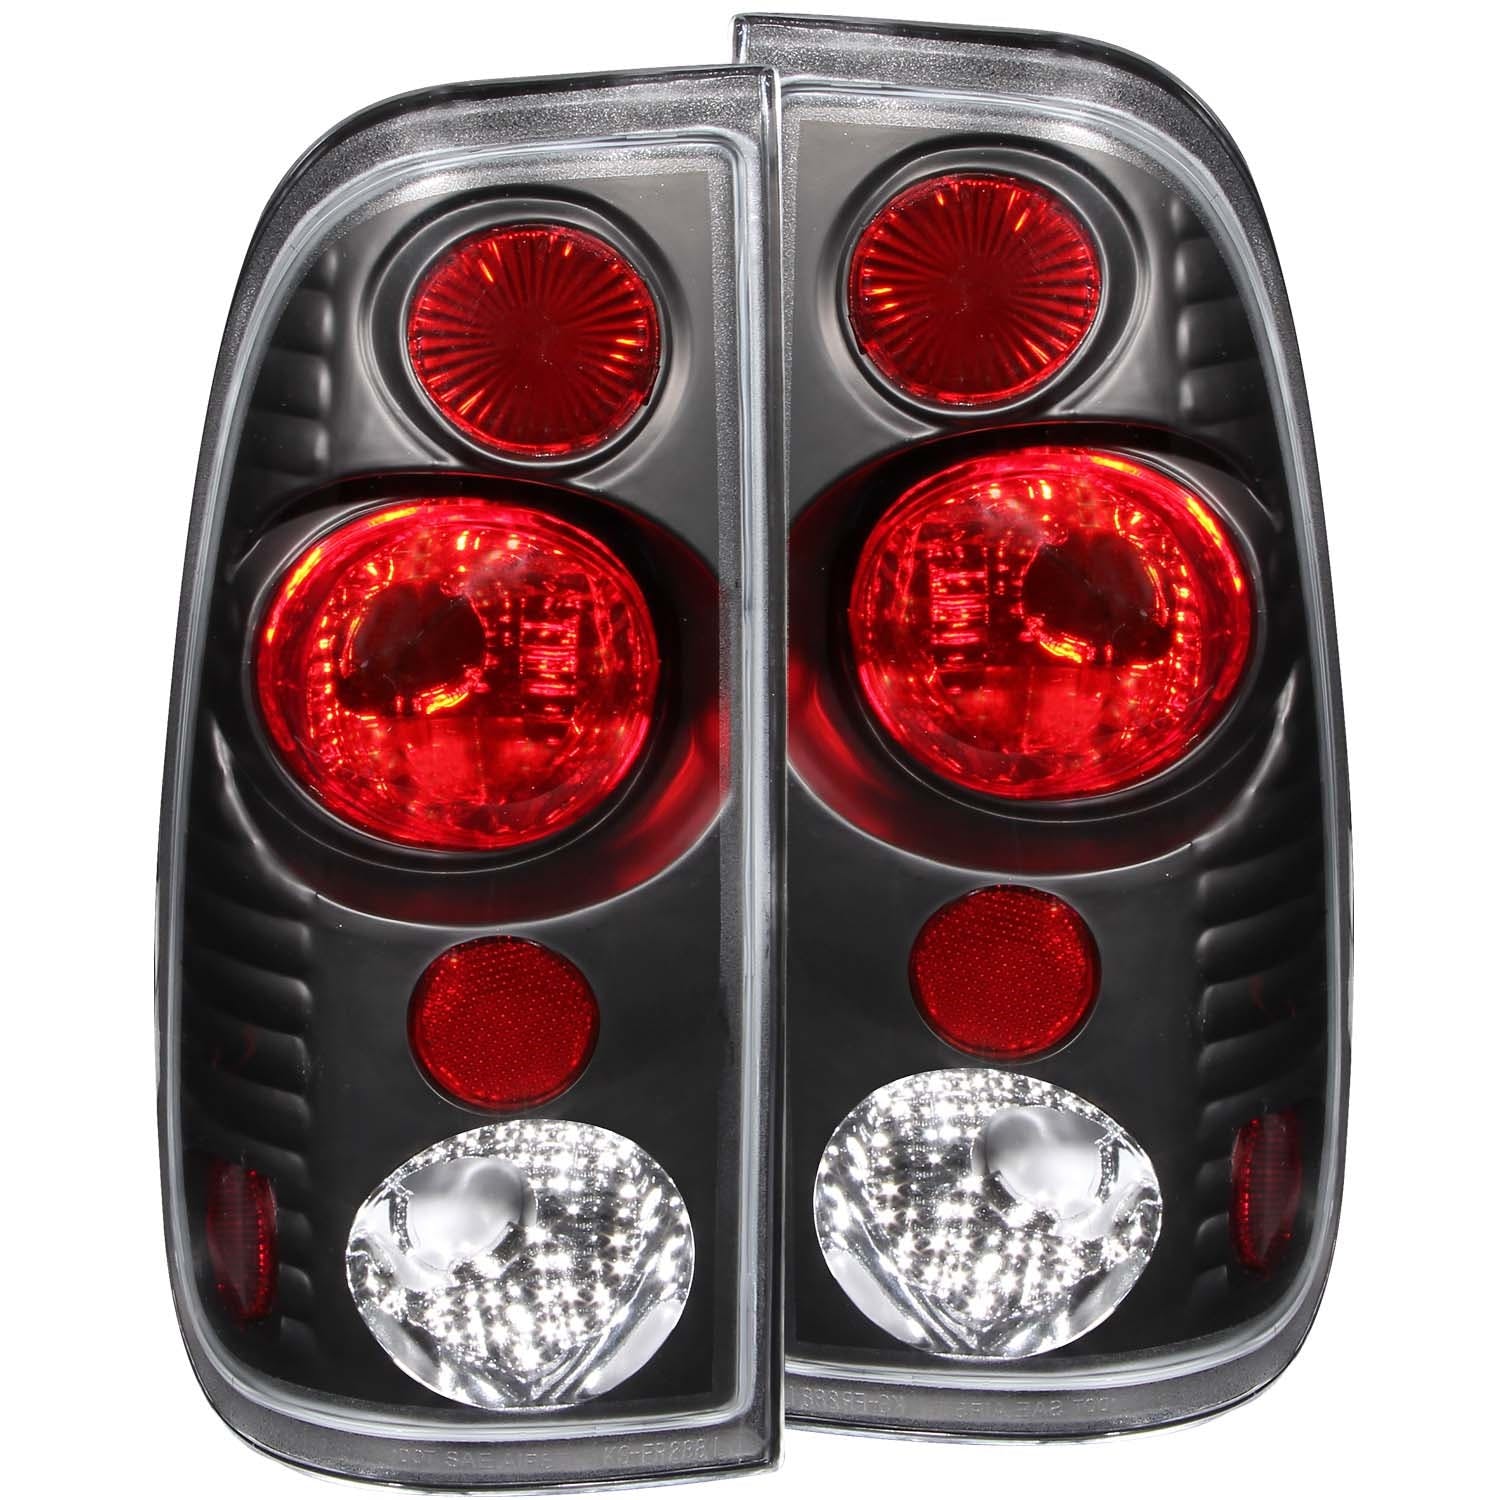 AnzoUSA 211065 Taillights Black G2